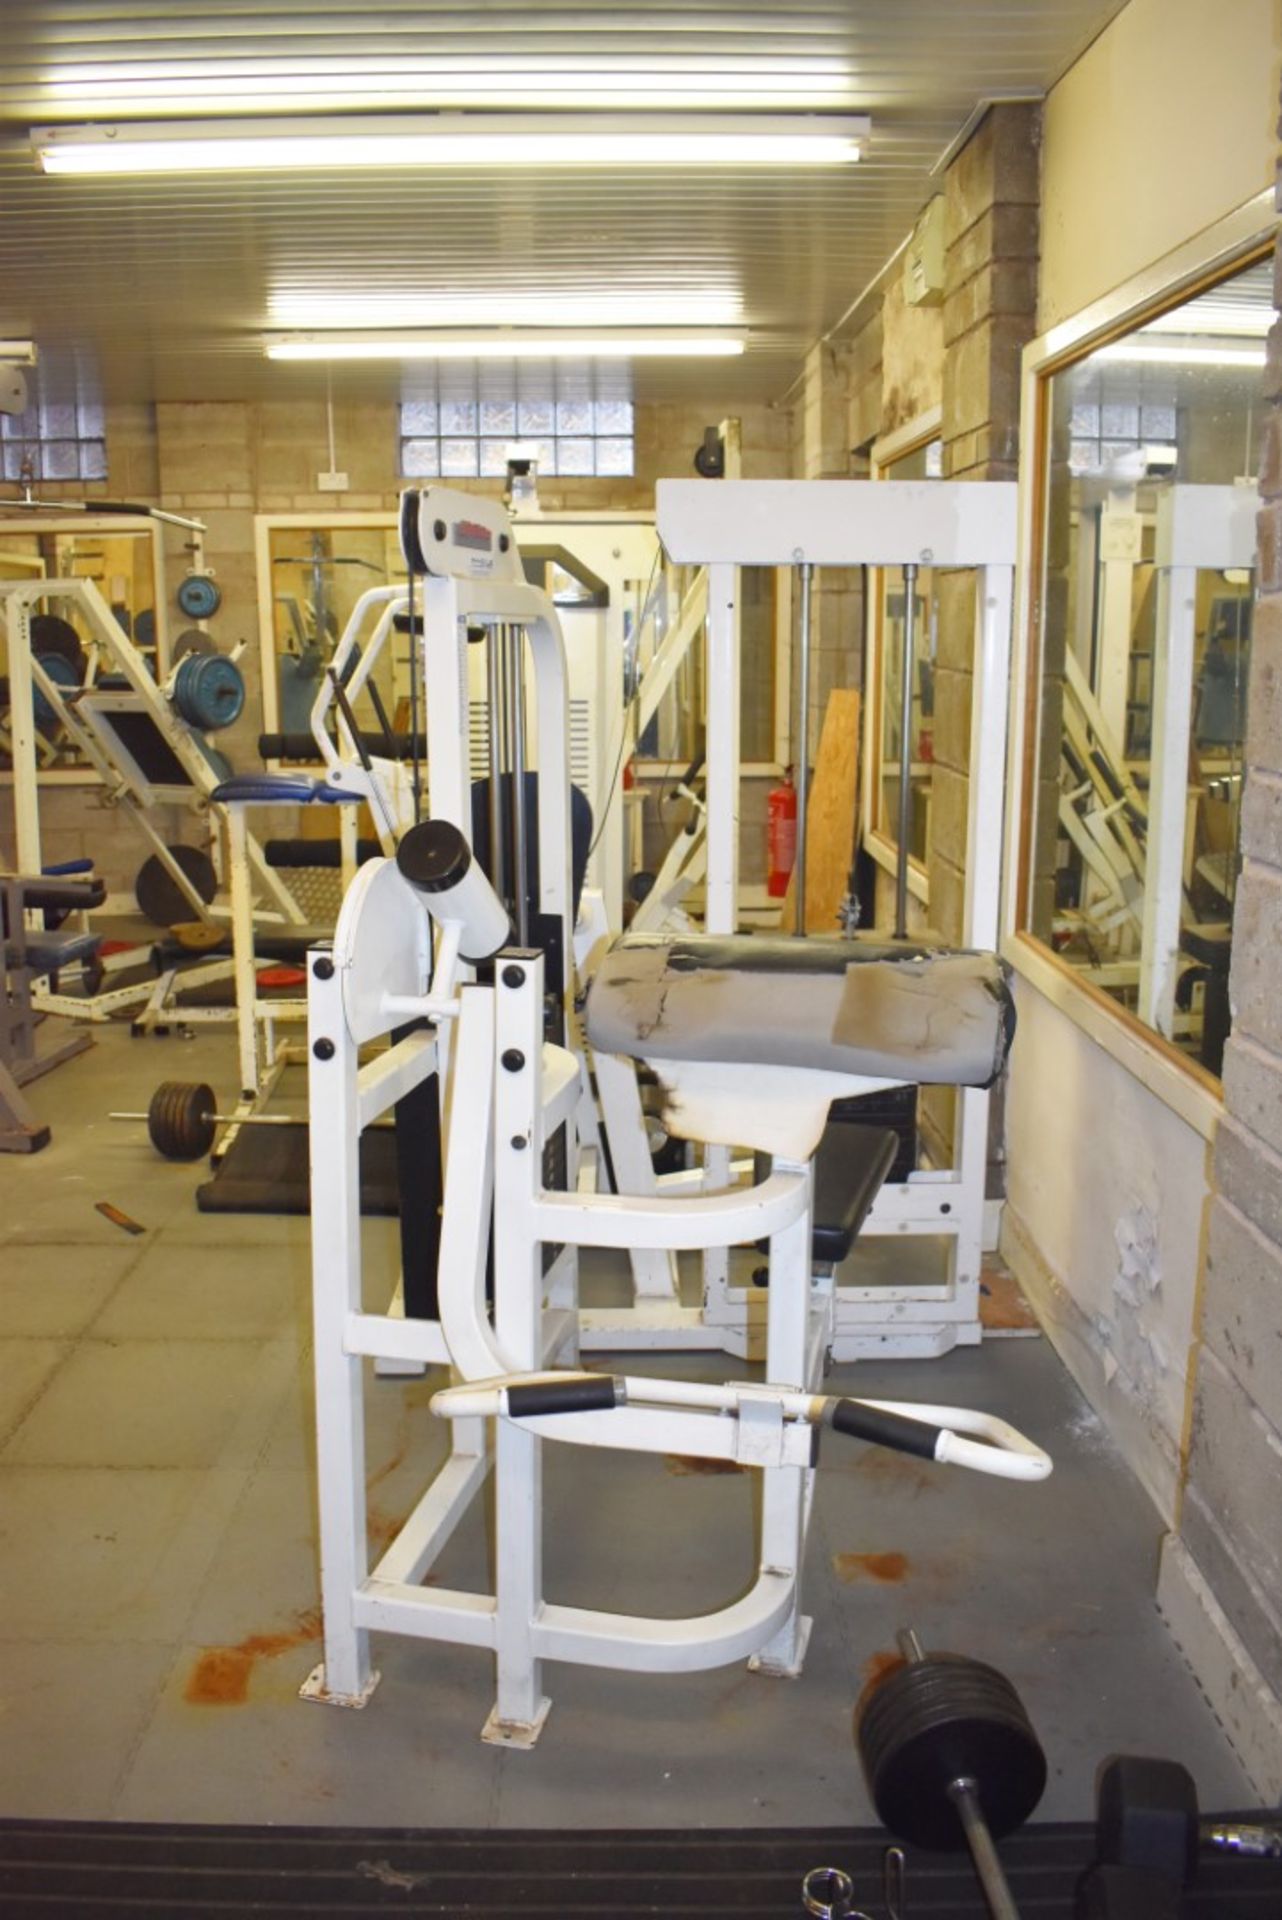 Contents of Bodybuilding and Strongman Gym - Includes Approx 30 Pieces of Gym Equipment, Floor Mats, - Image 56 of 95